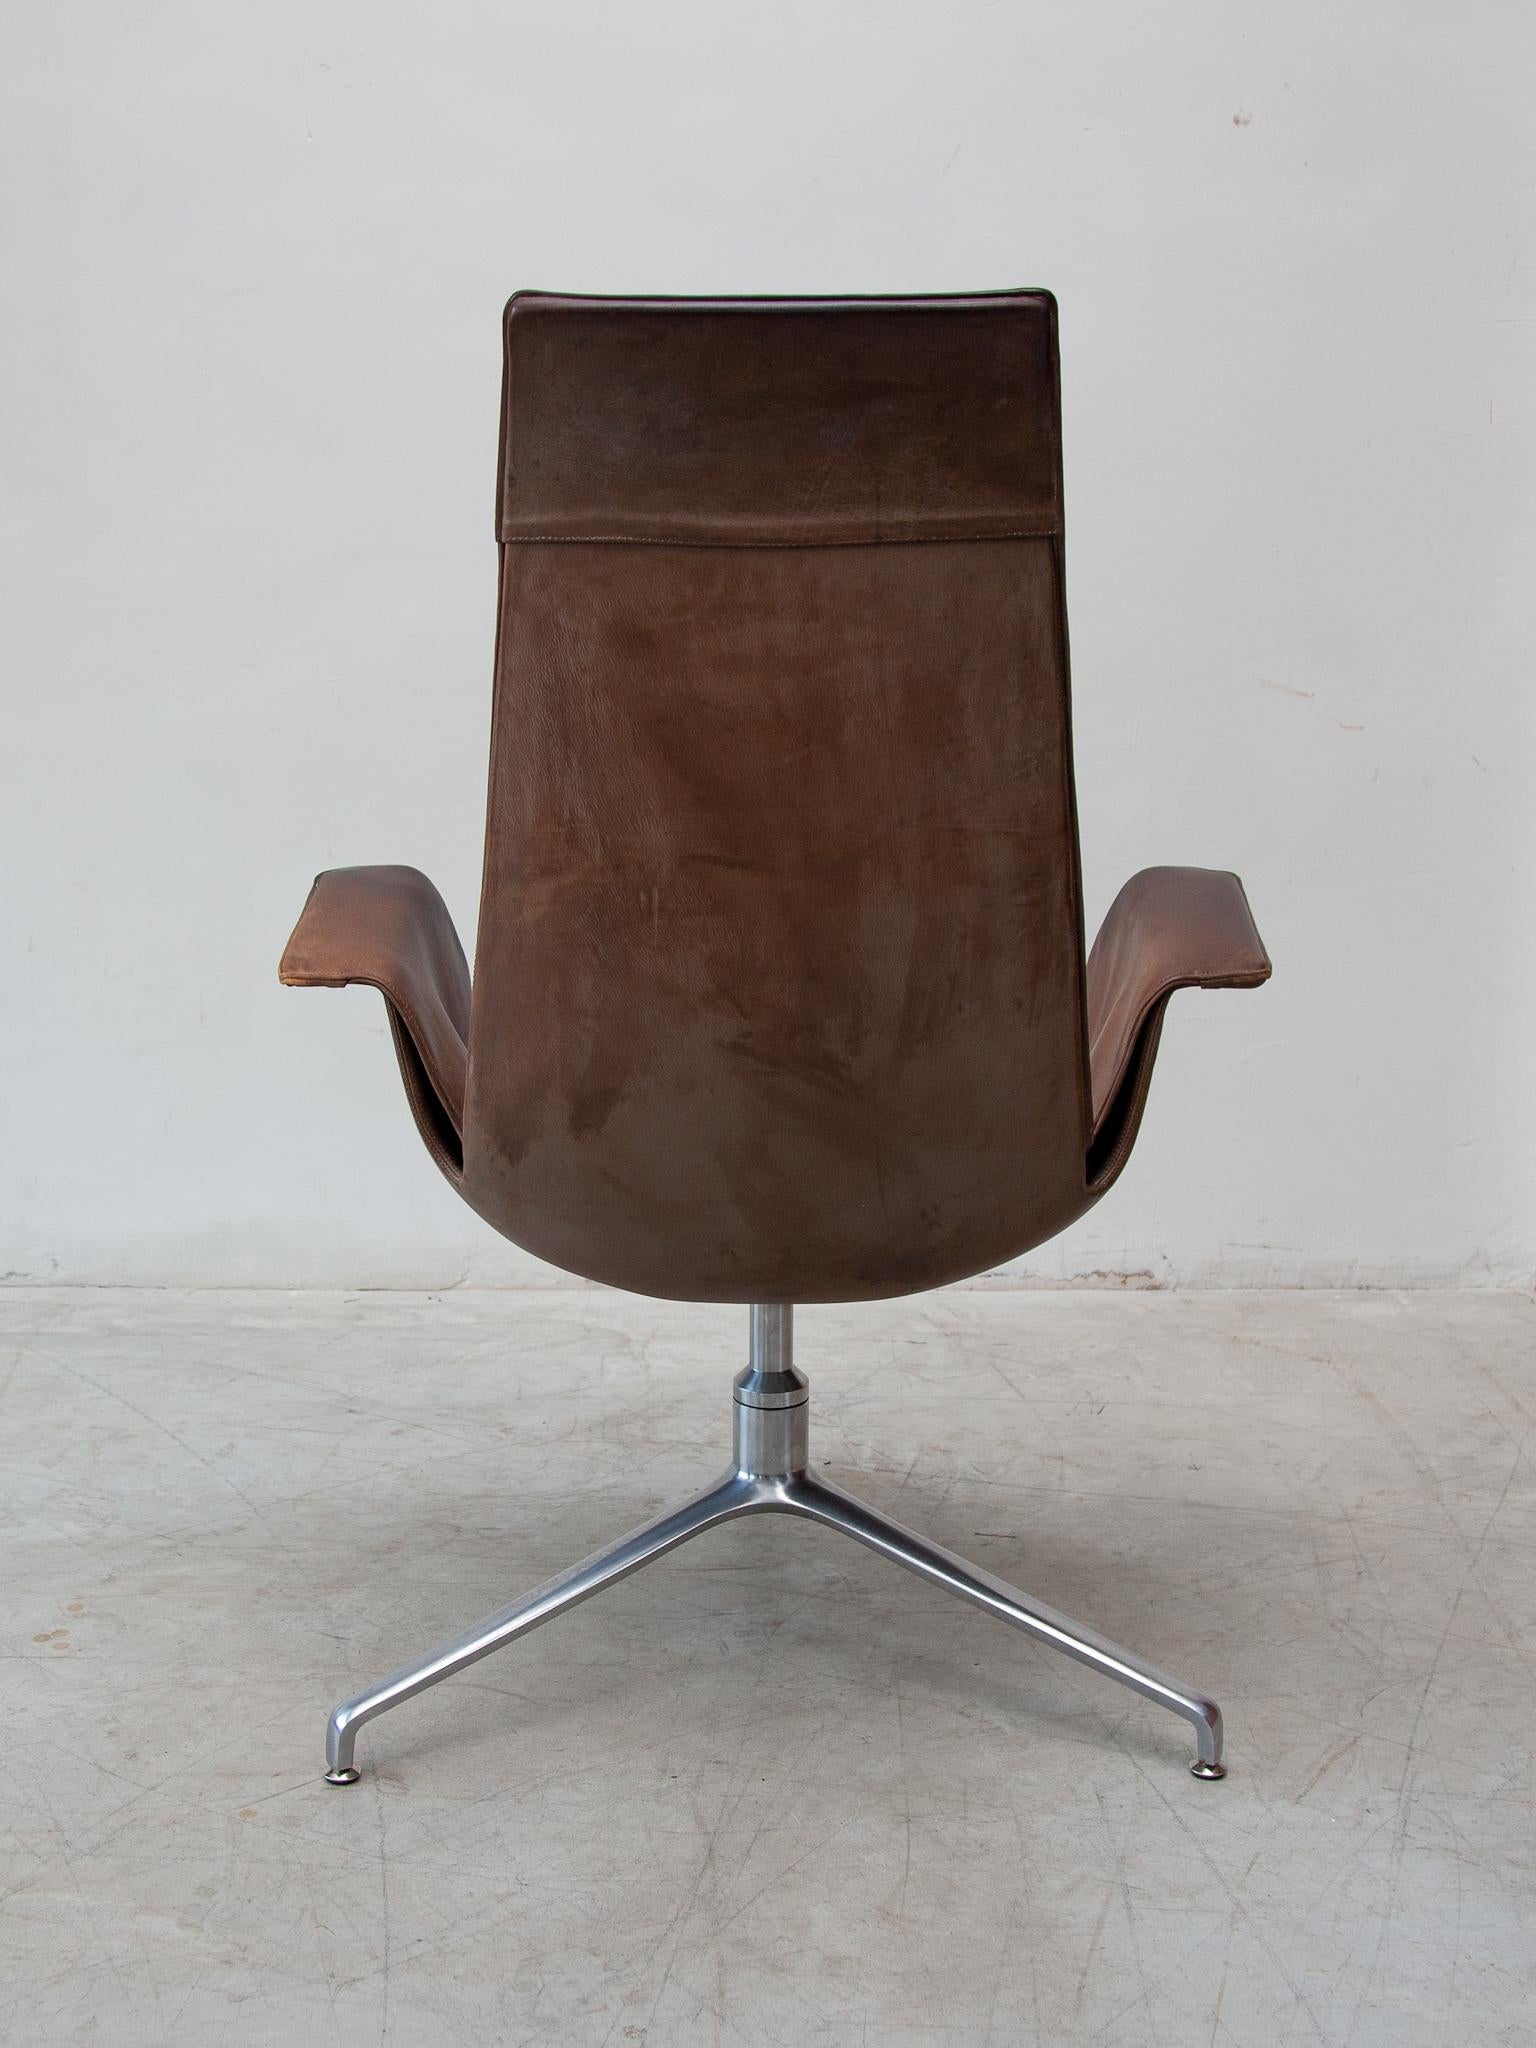 Fabricius & Kastholm FK6725 Desk, Lounge Chair in Brown Leather, Kill 4